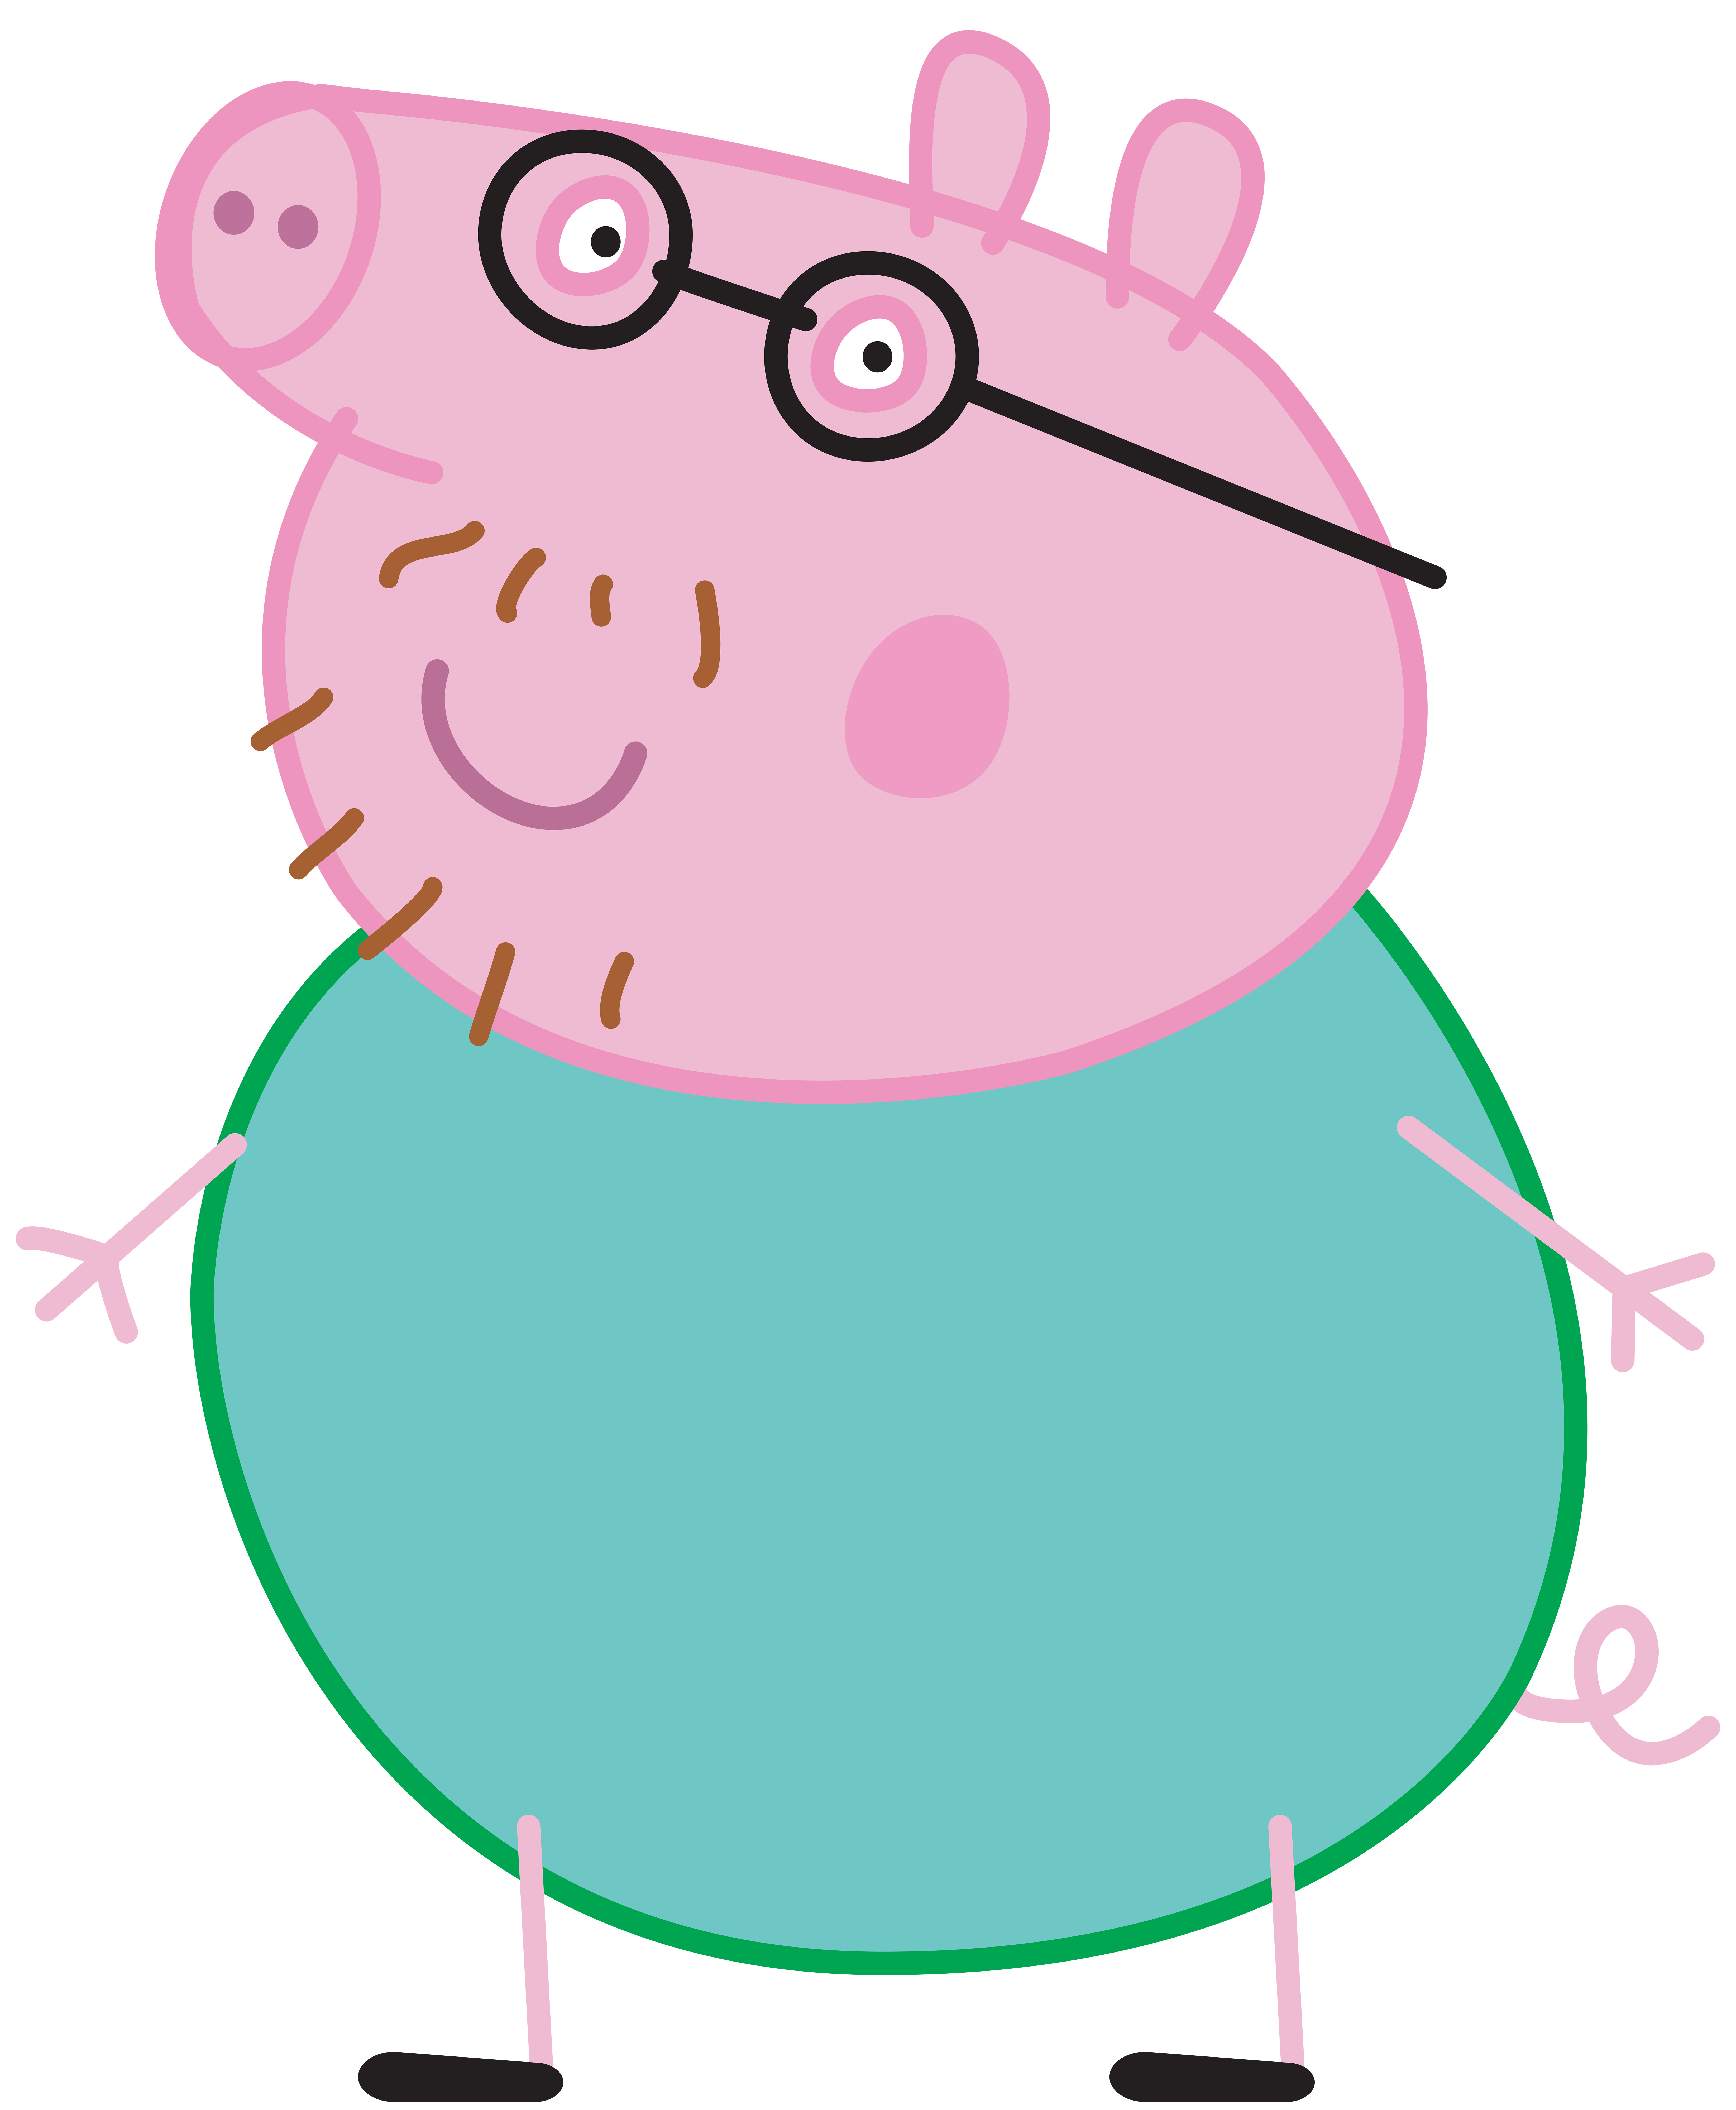 Daddy Pig Peppa Pig Transparent PNG Image Quality Image And Transparent PNG Free Clipart